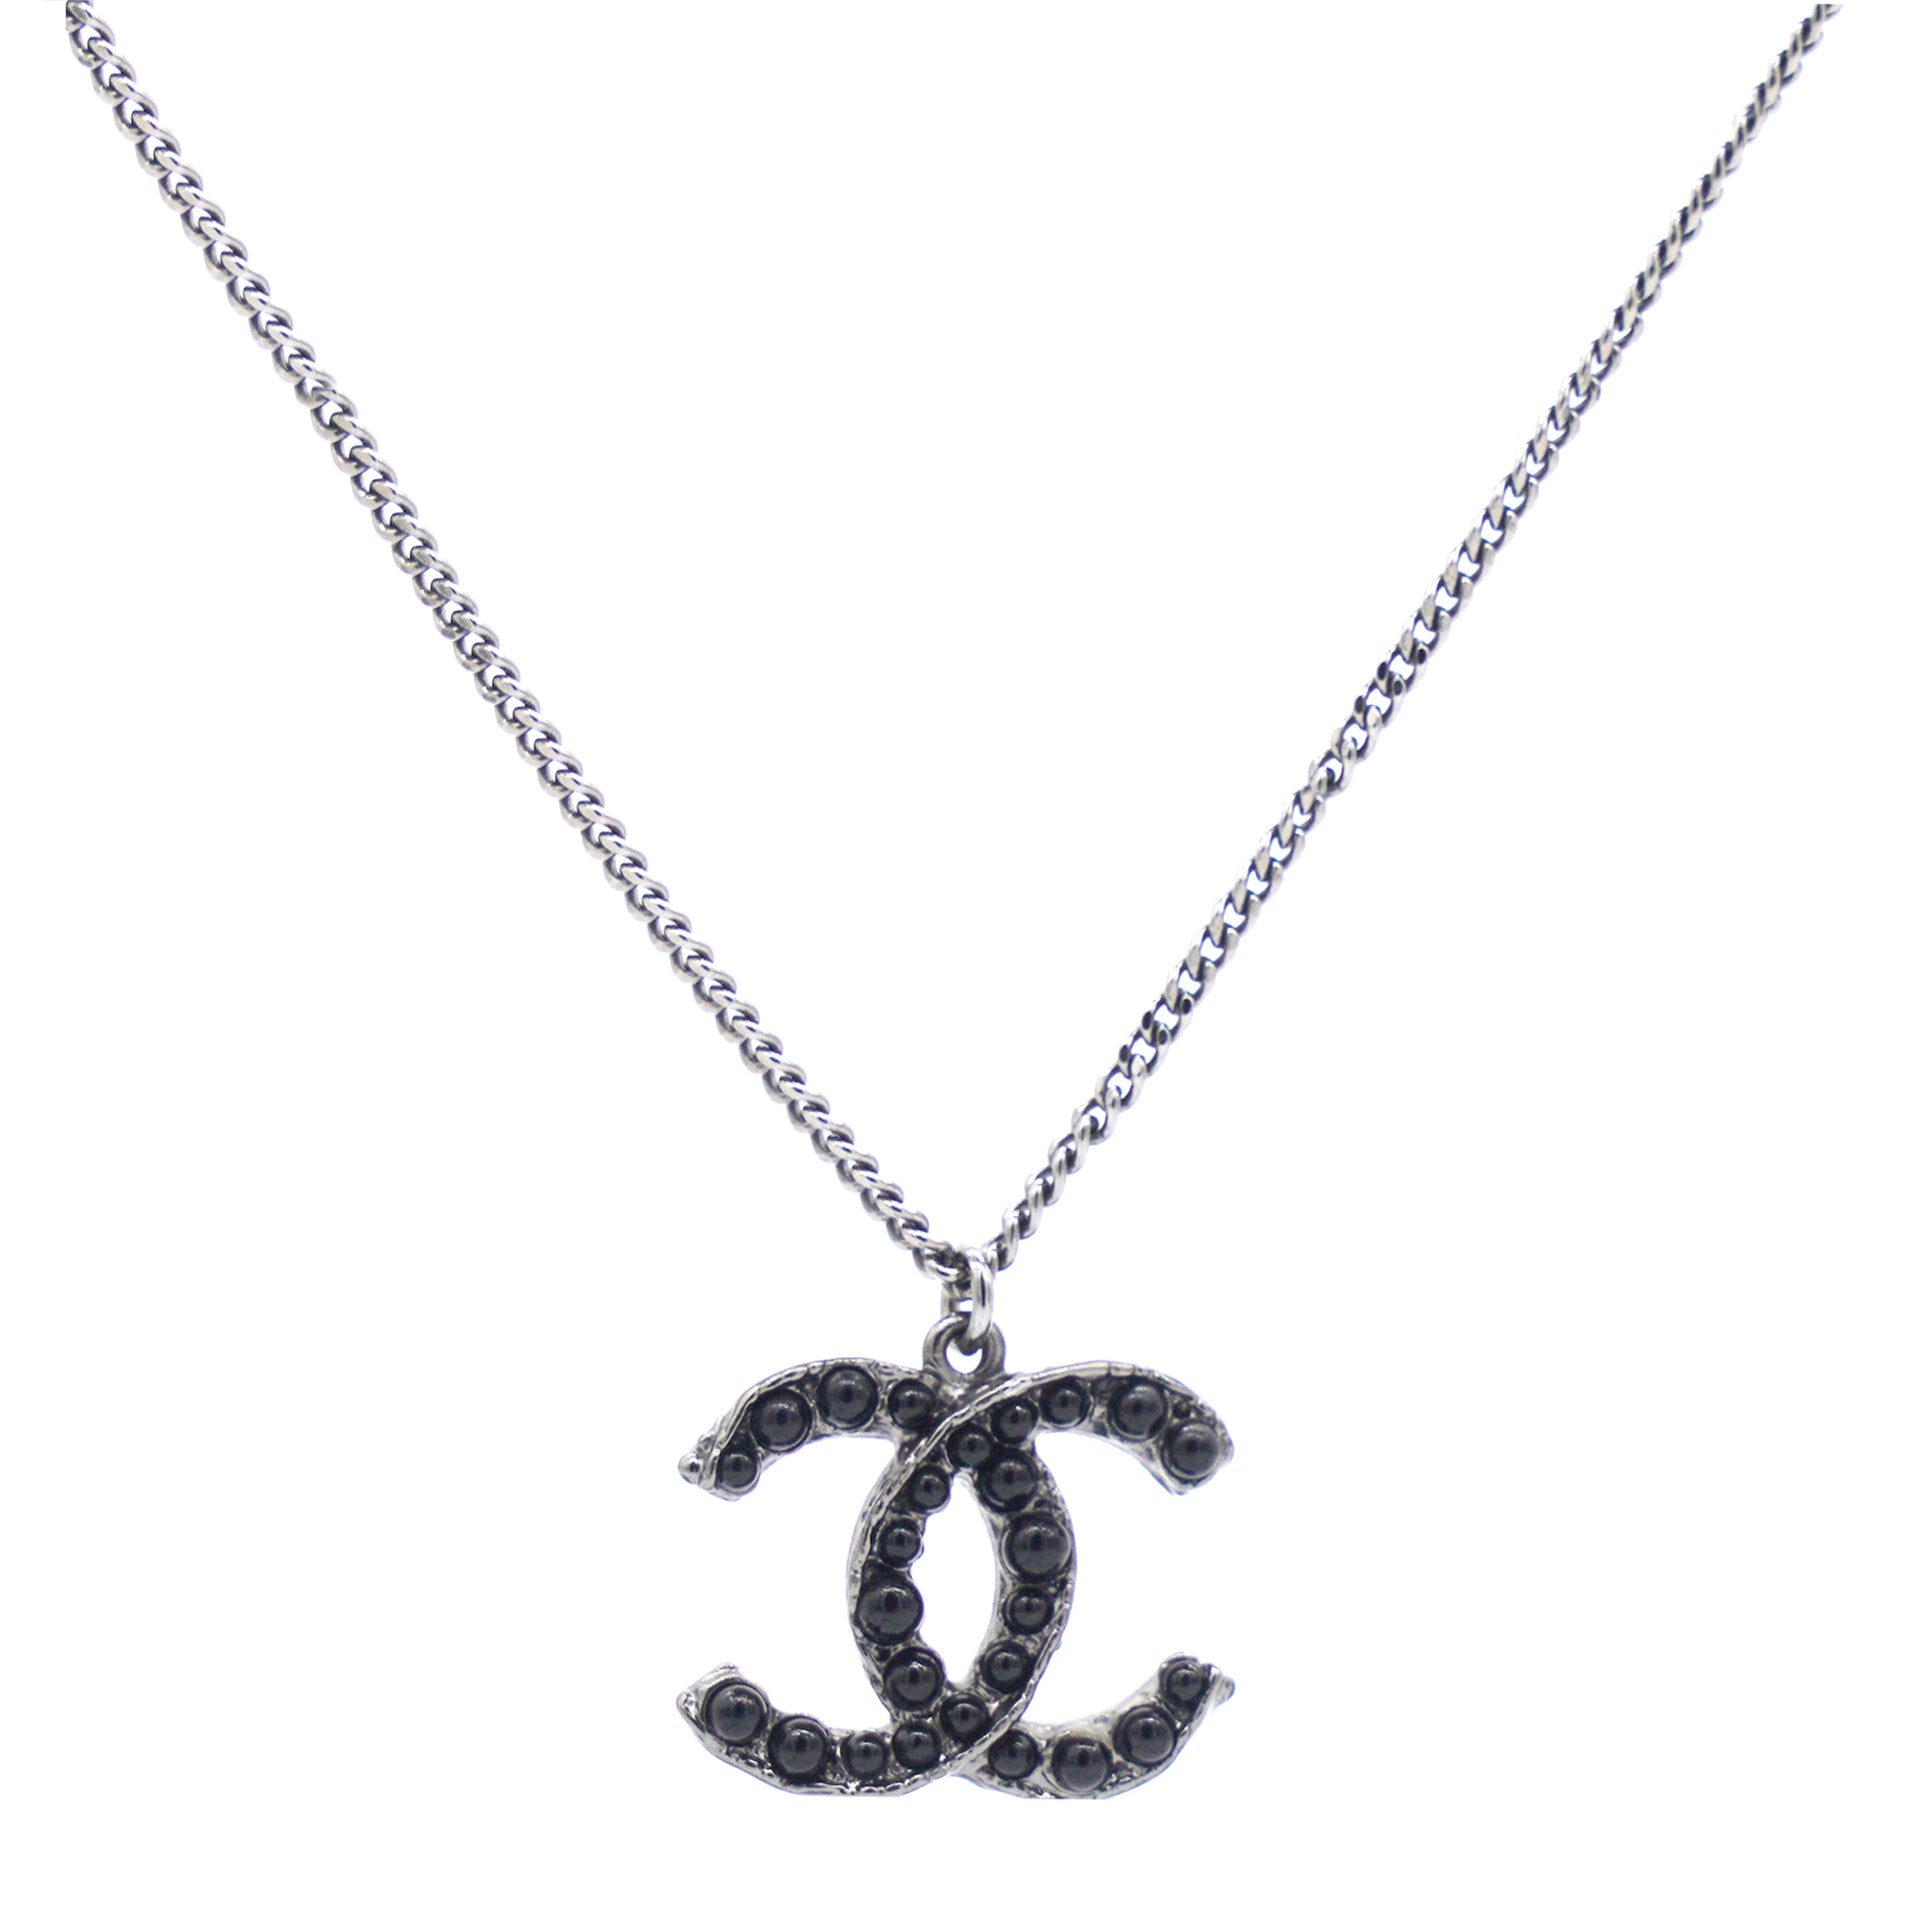 Shop authentic Chanel Black Bead Long Necklace at revogue for just USD  125000